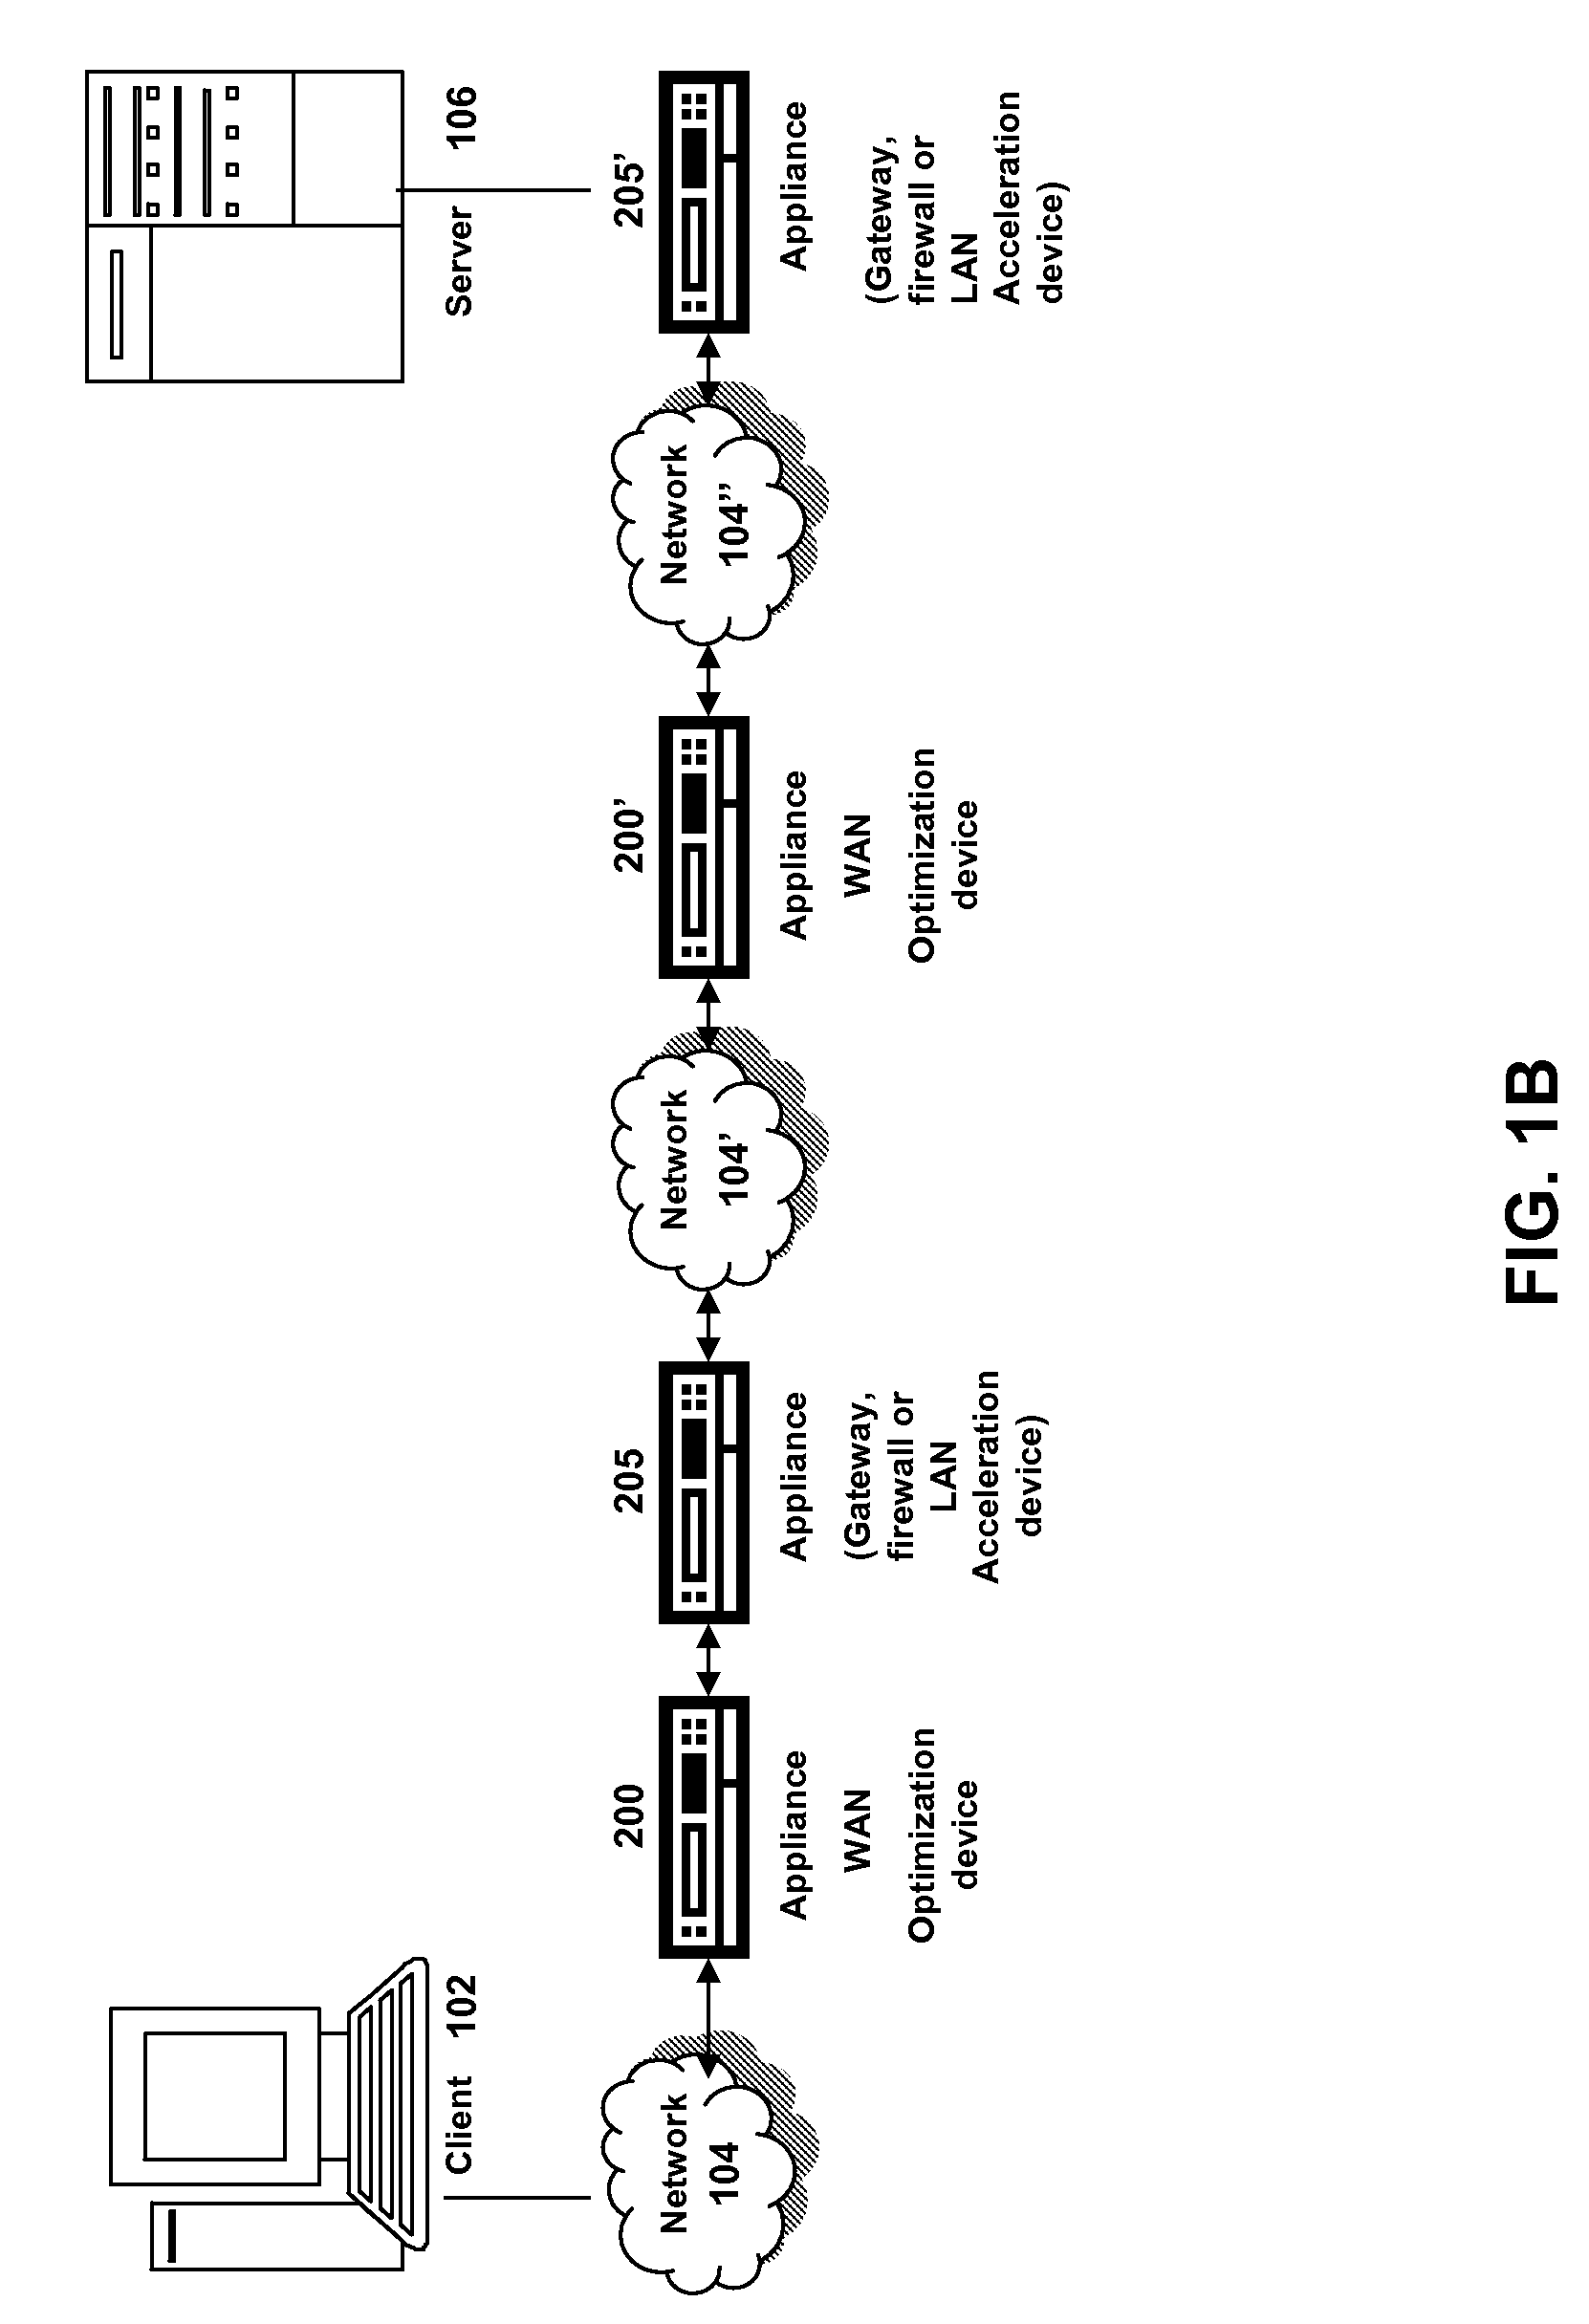 Systems and methods for prefetching objects for caching using QOS